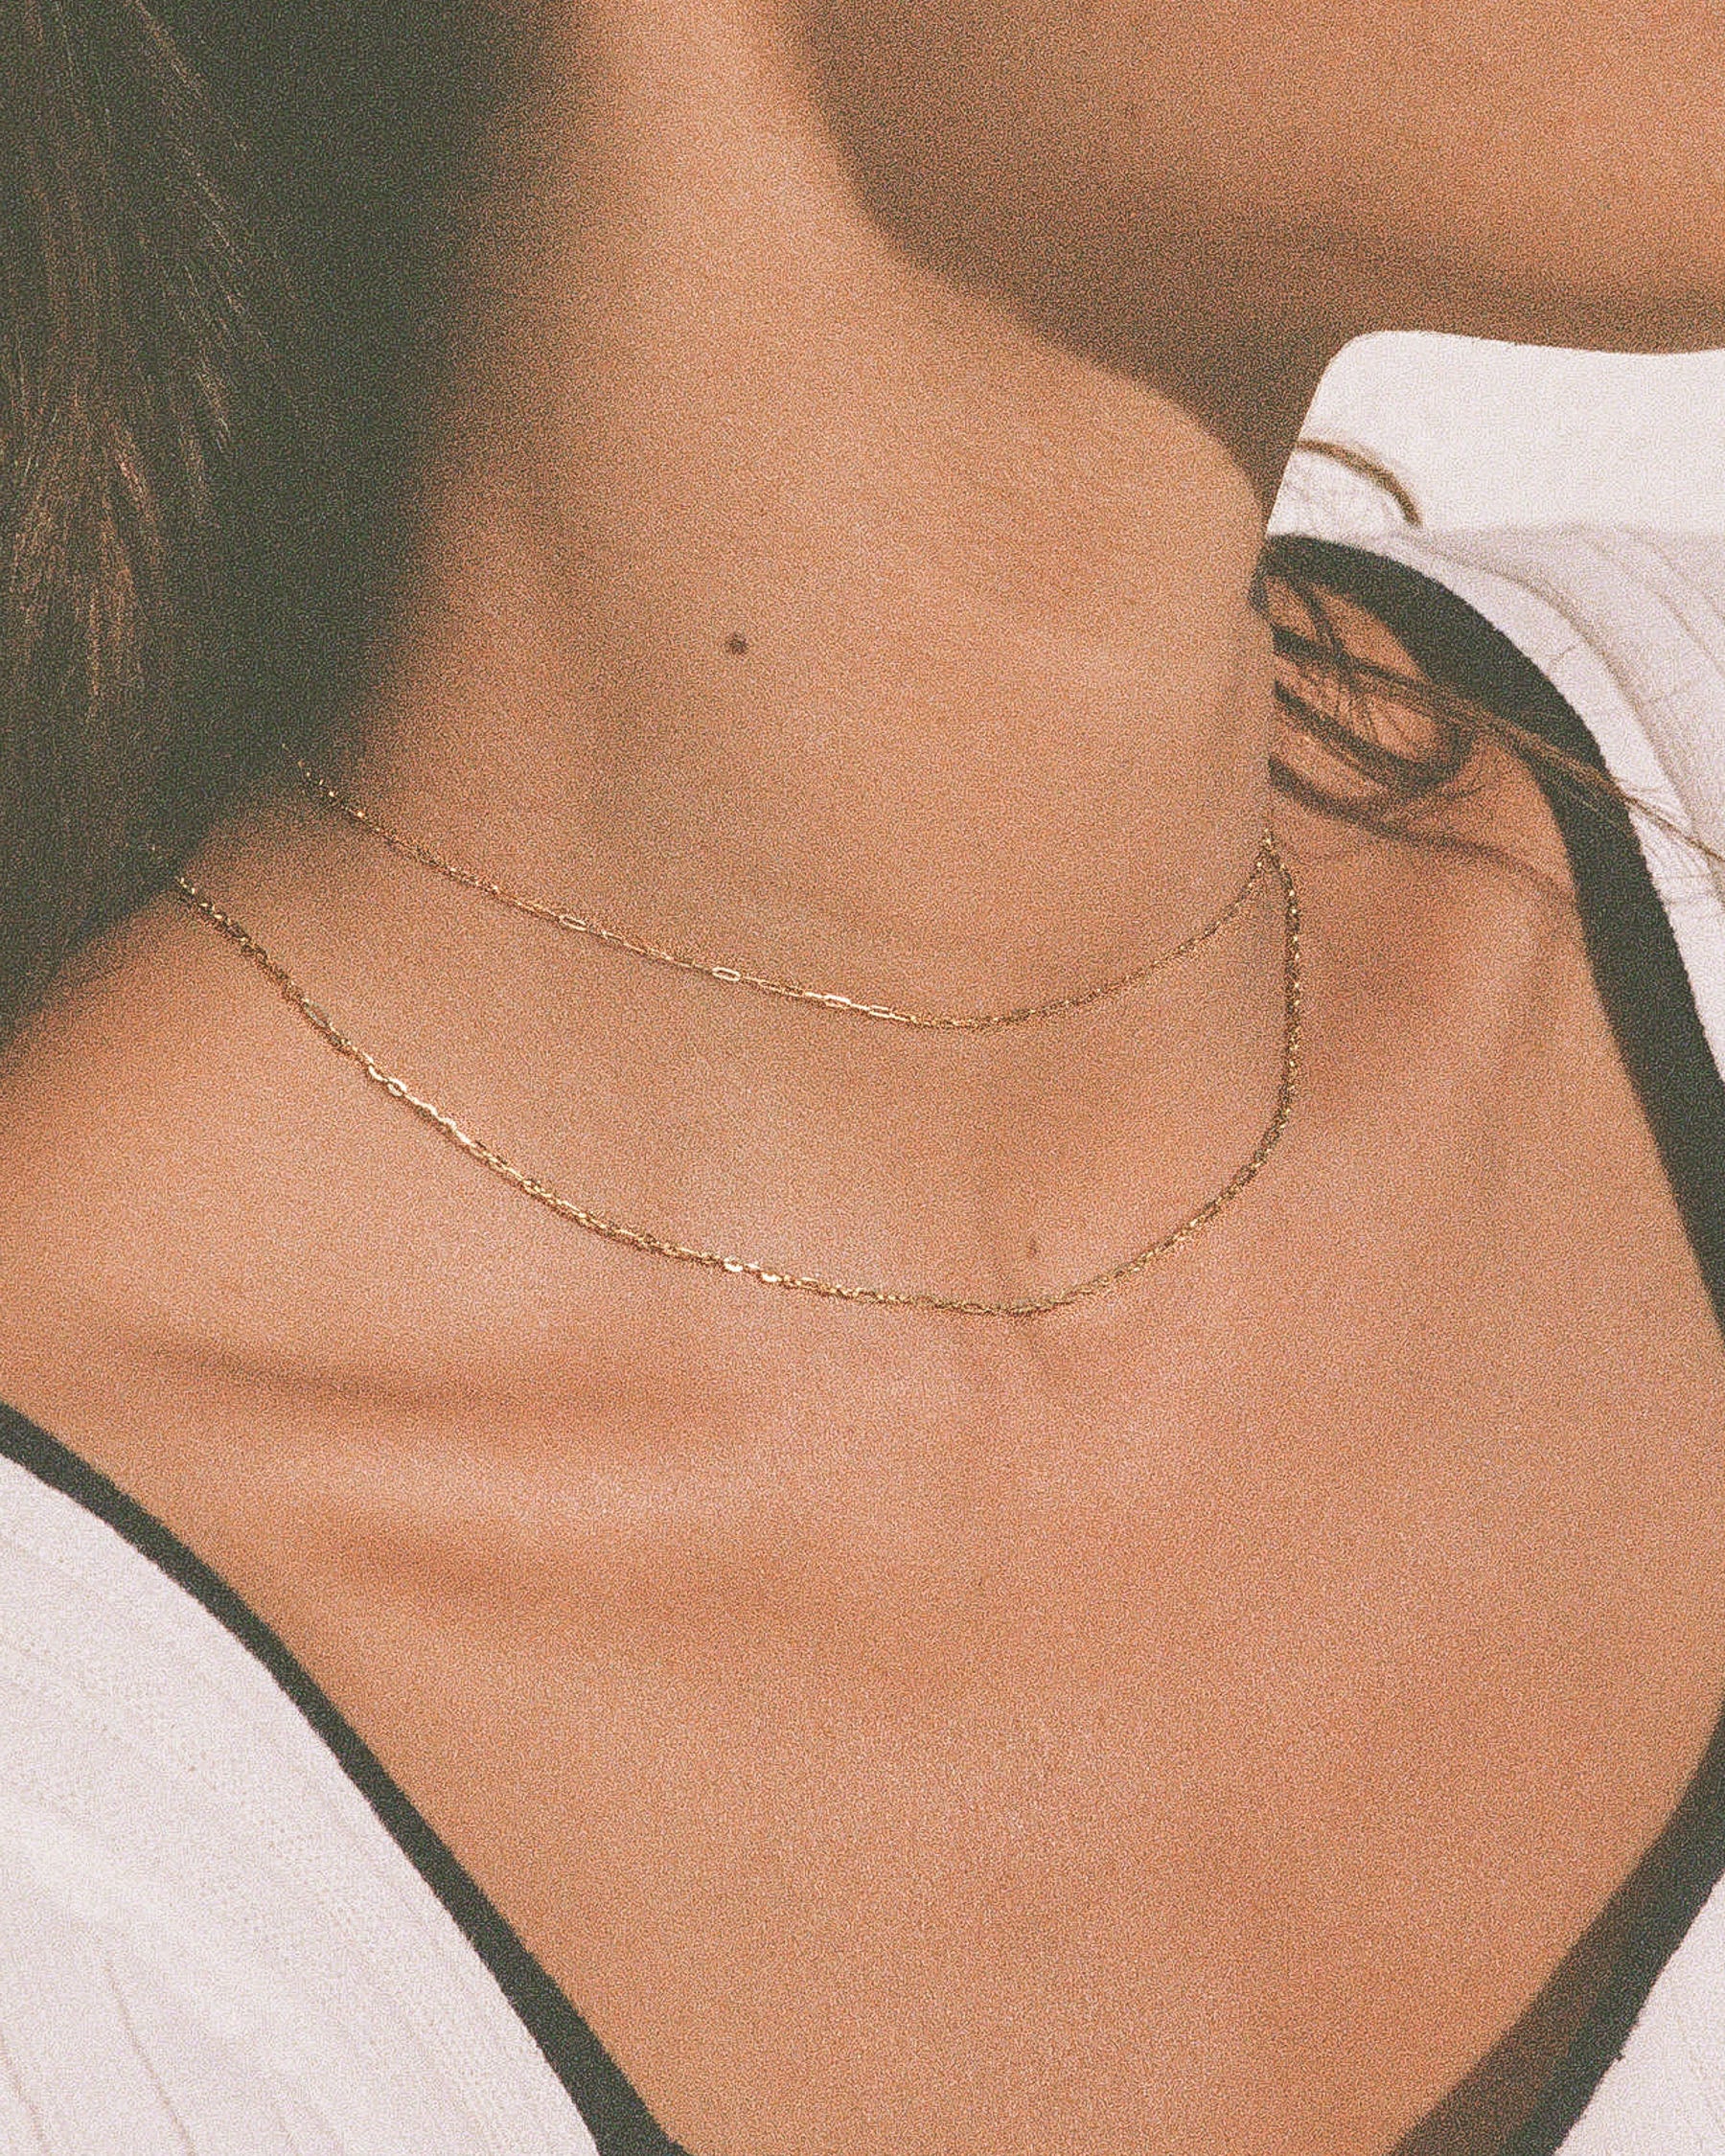 14K Solid Gold Baby Paperclip Chain Necklace